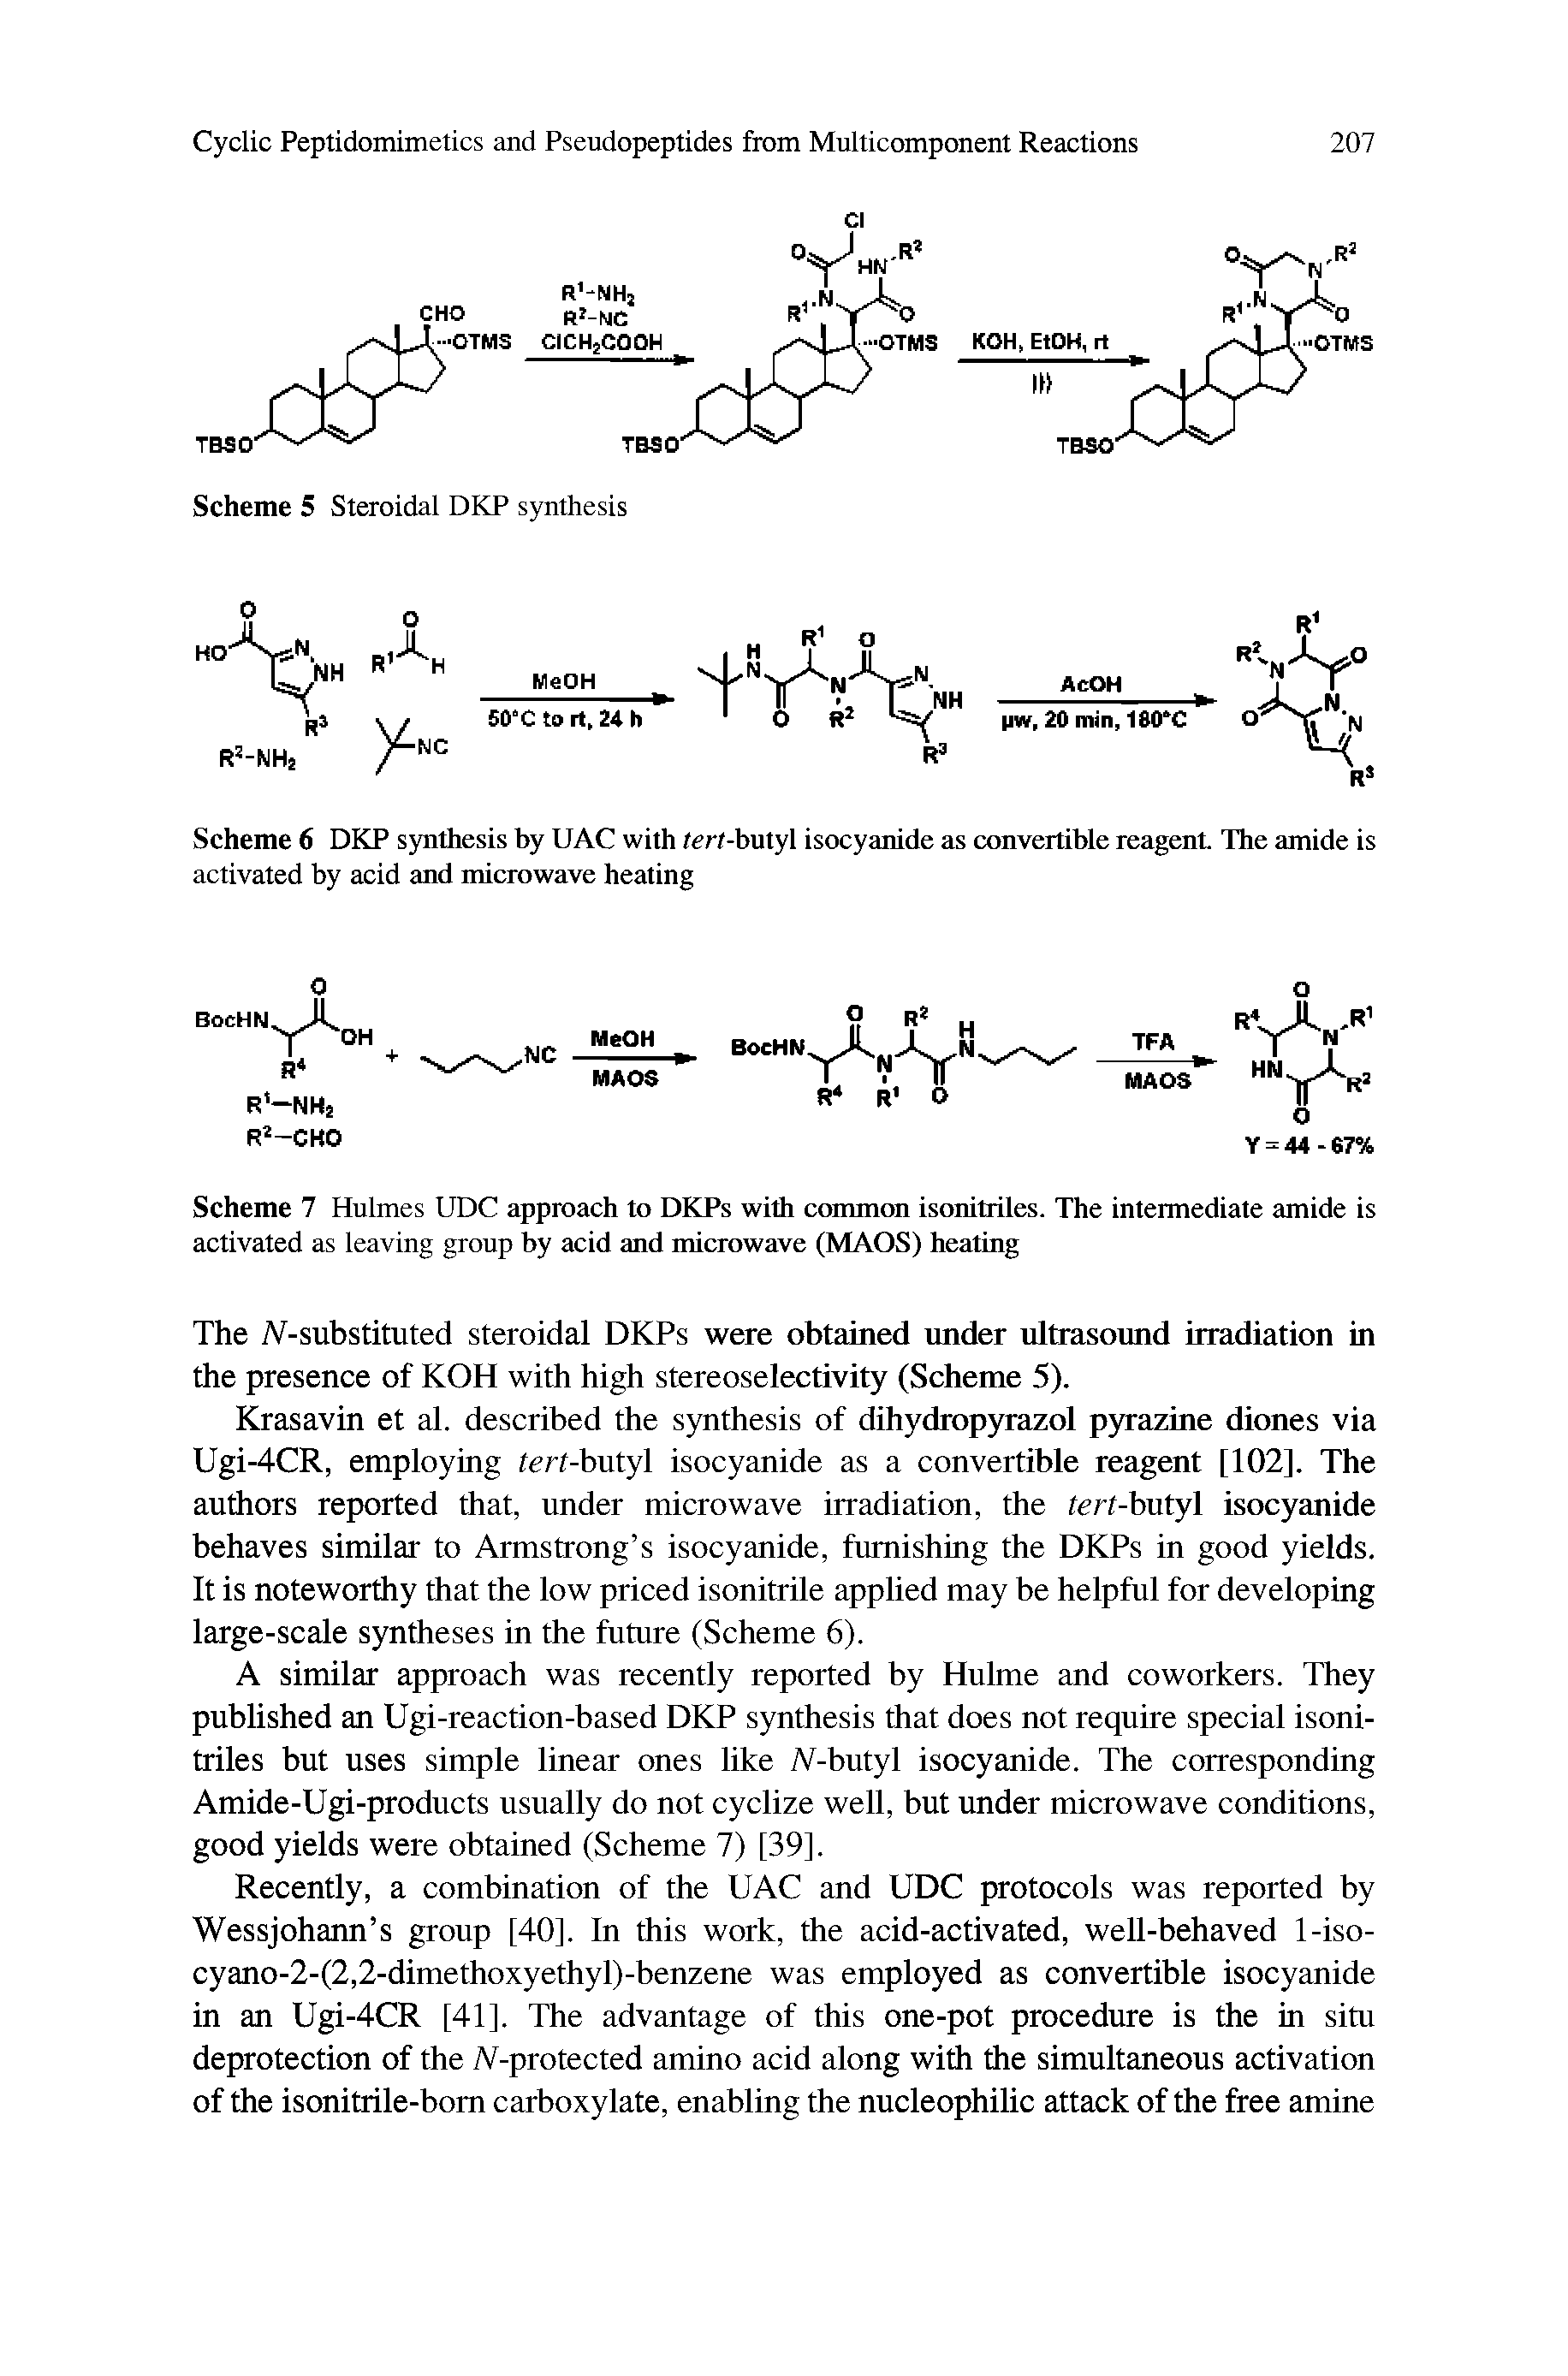 Scheme 6 DKP synthesis by UAC with tert-butyl isocyanide as convertible reagent The amide is activated by acid and microwave heating...